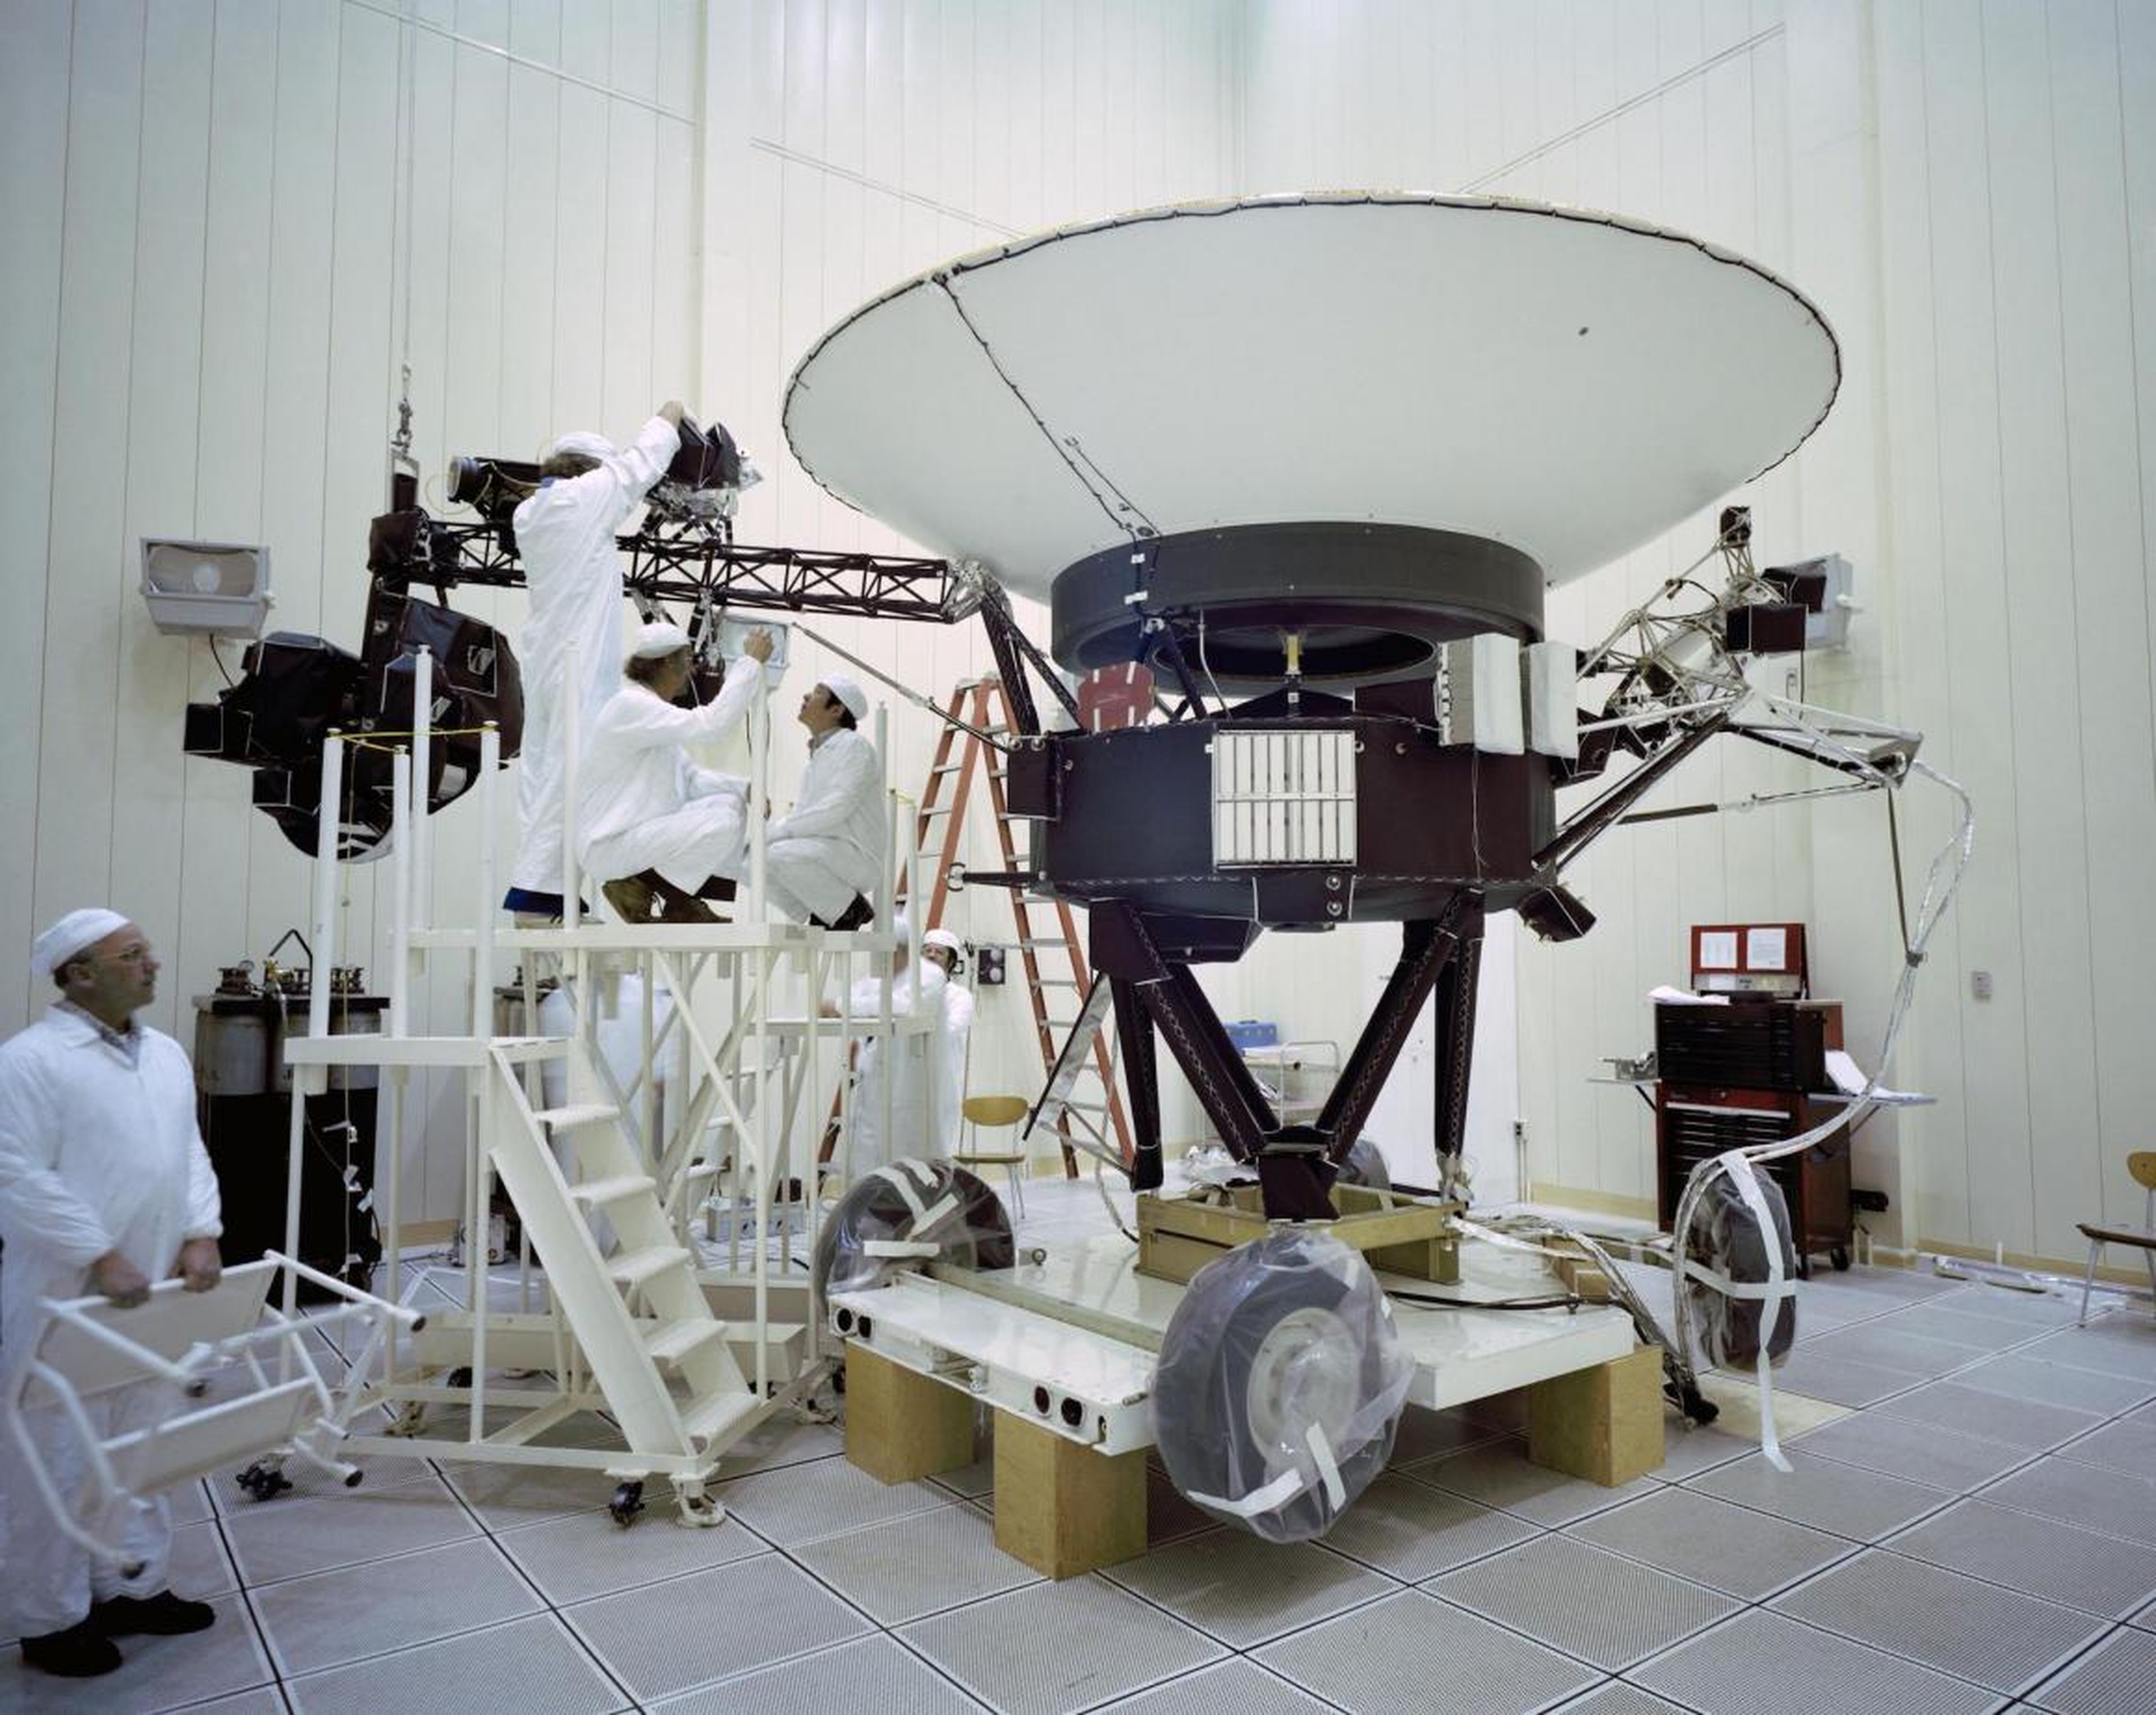 Sagan also worked on the Voyager missions, which launched in the summer of 1977 from Cape Canaveral.